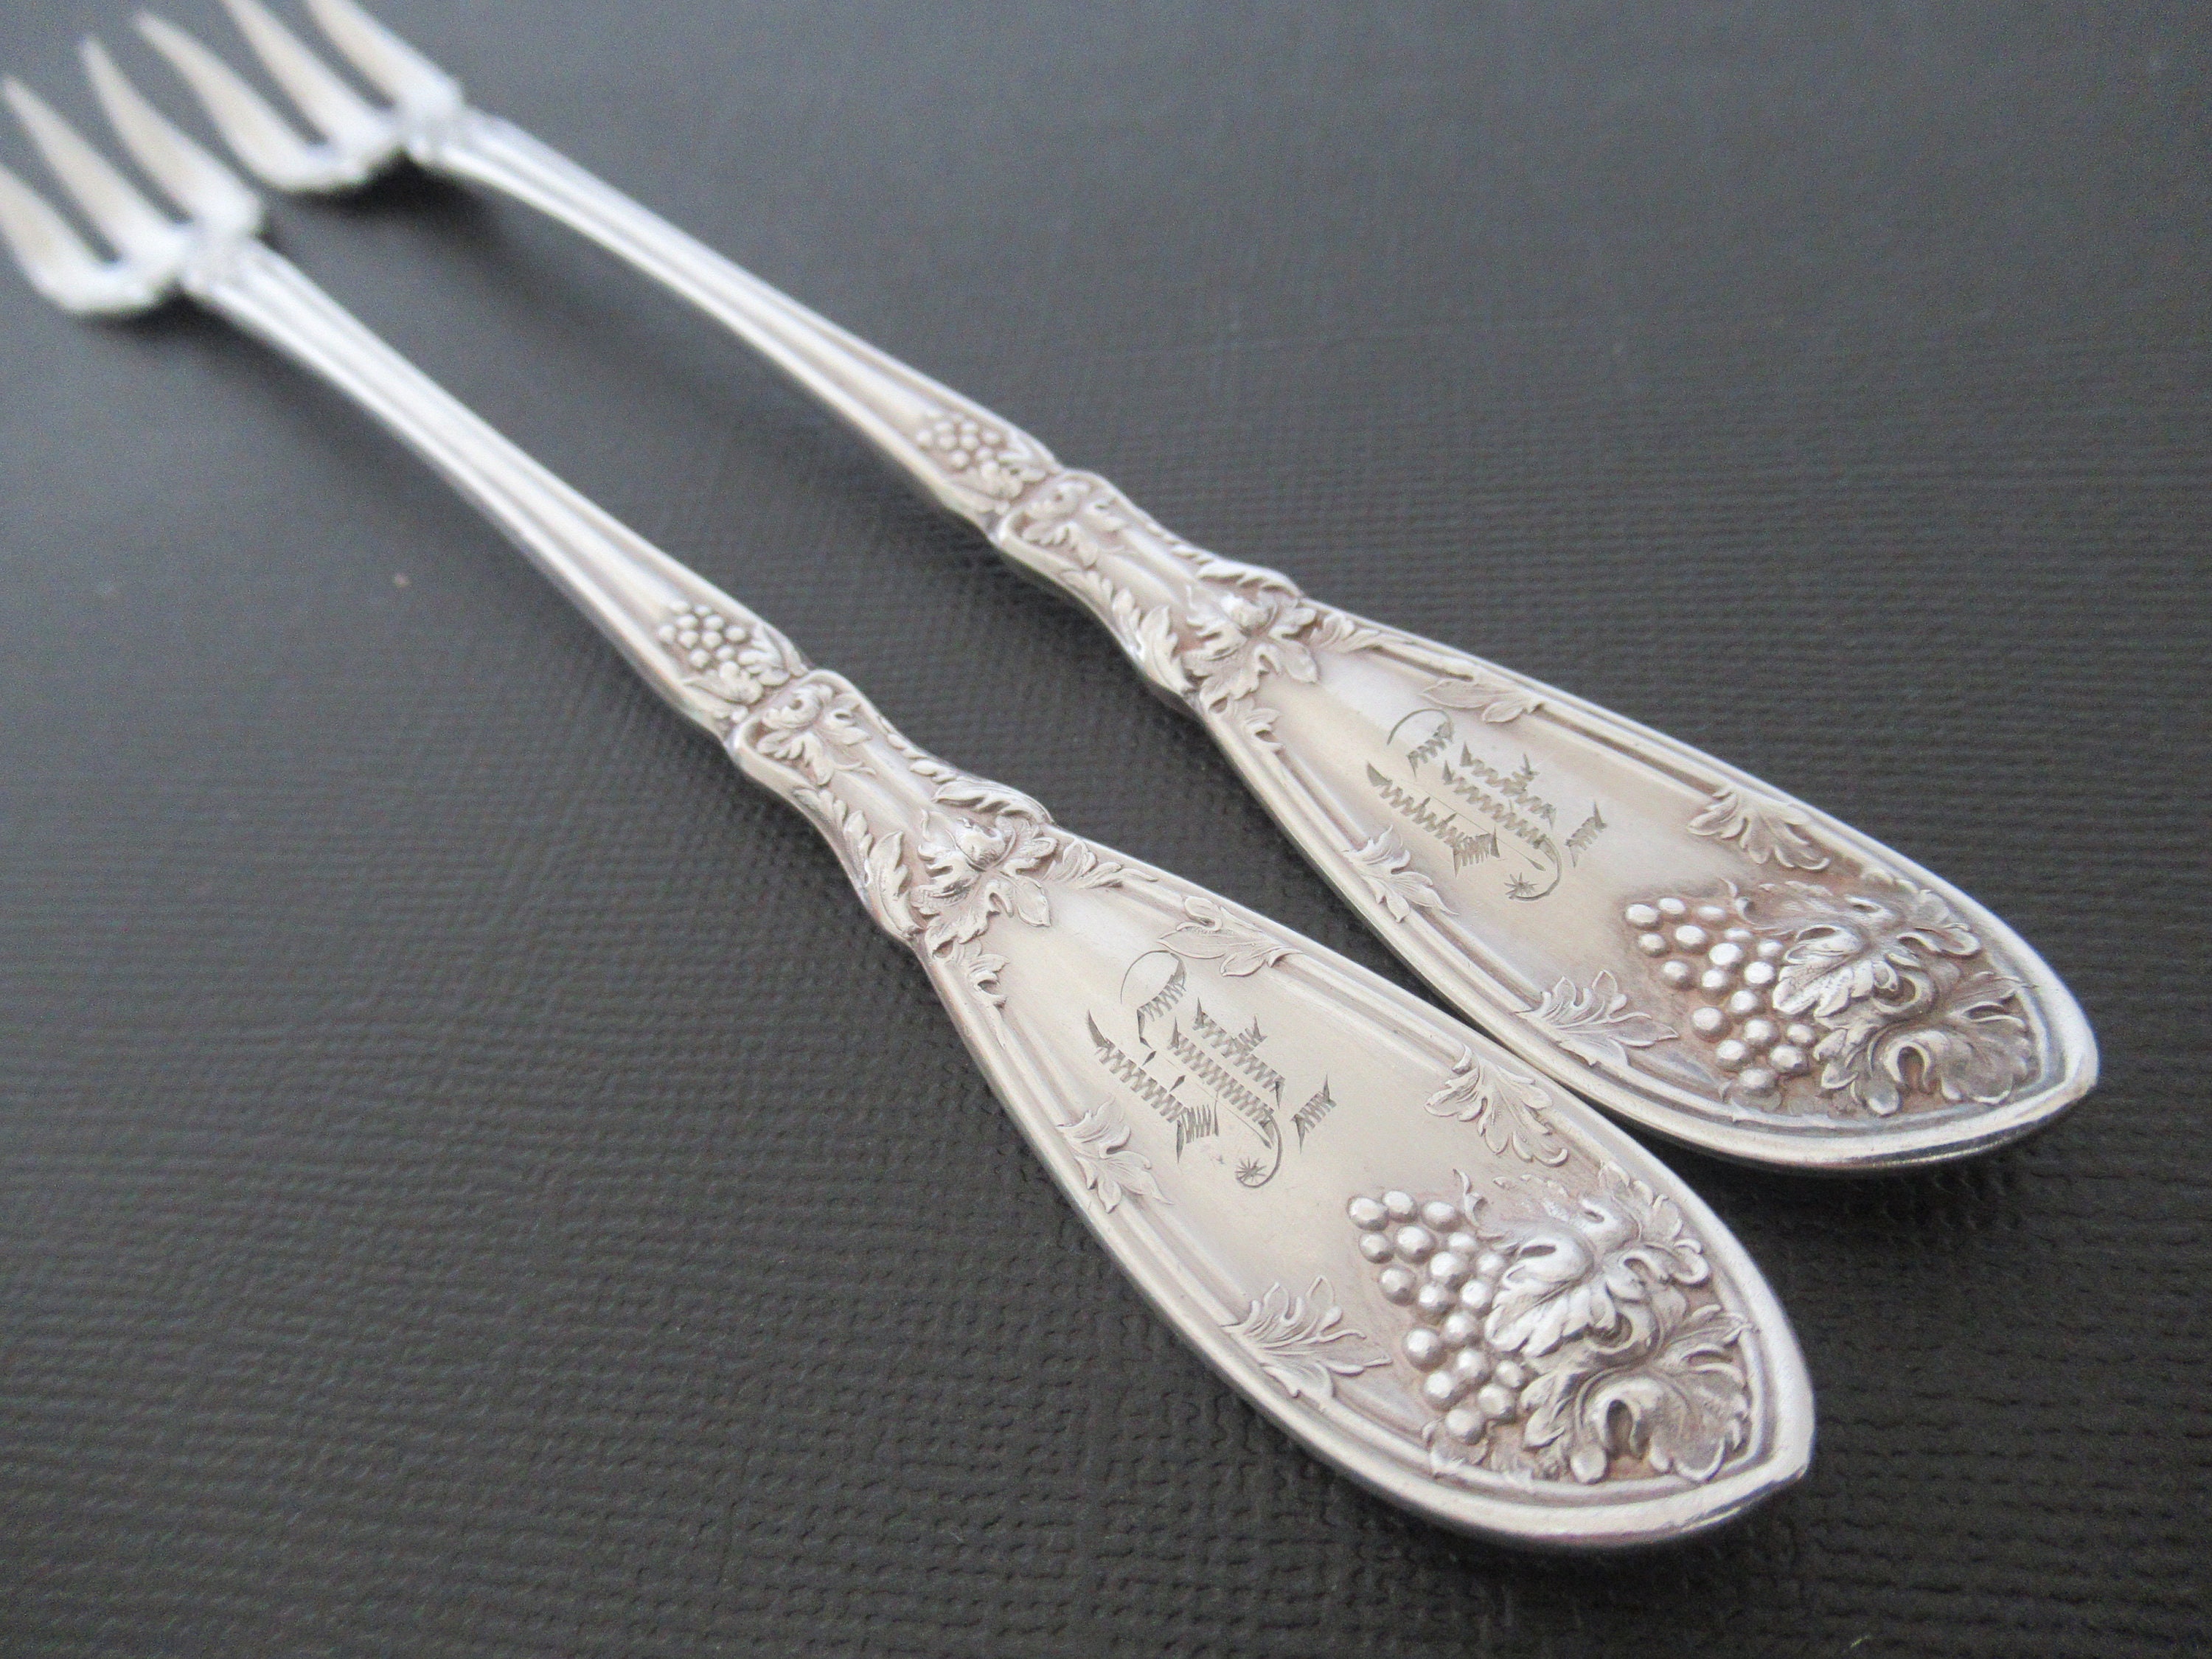 Antique Cocktail Forks La Vigne 1908 By 1881 Rogers, H Monogrammed Victorian Silverplate Repousse Grape Serving Seafood